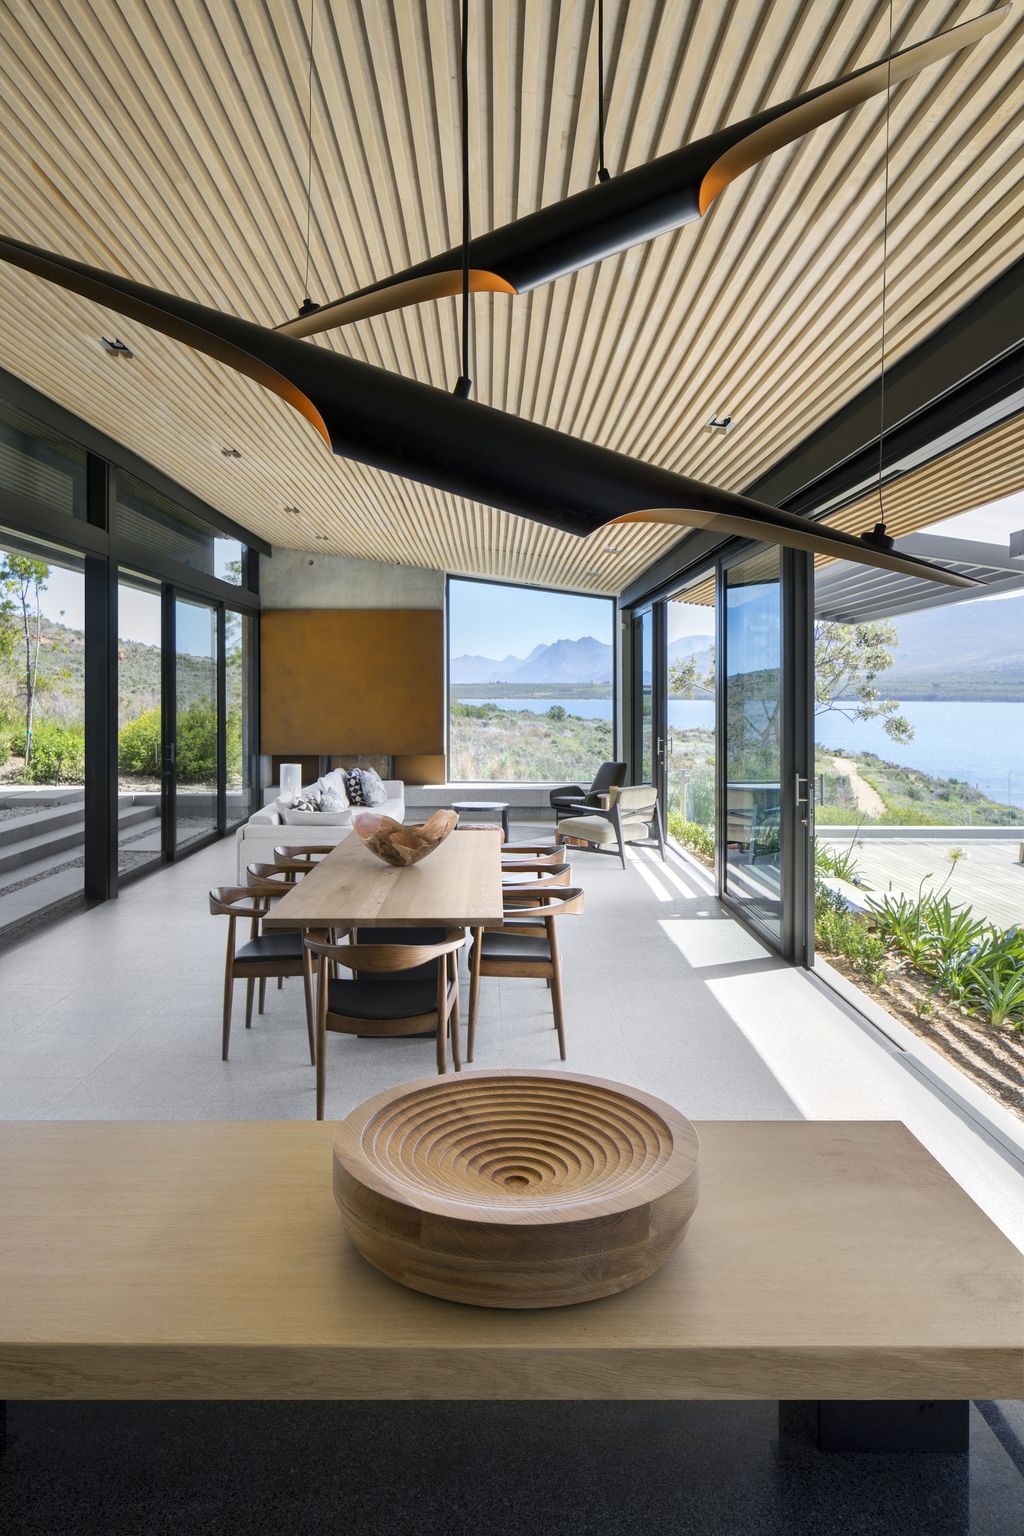 Panoramic Views of The Landscape with Benguela Cove House by SAOTA